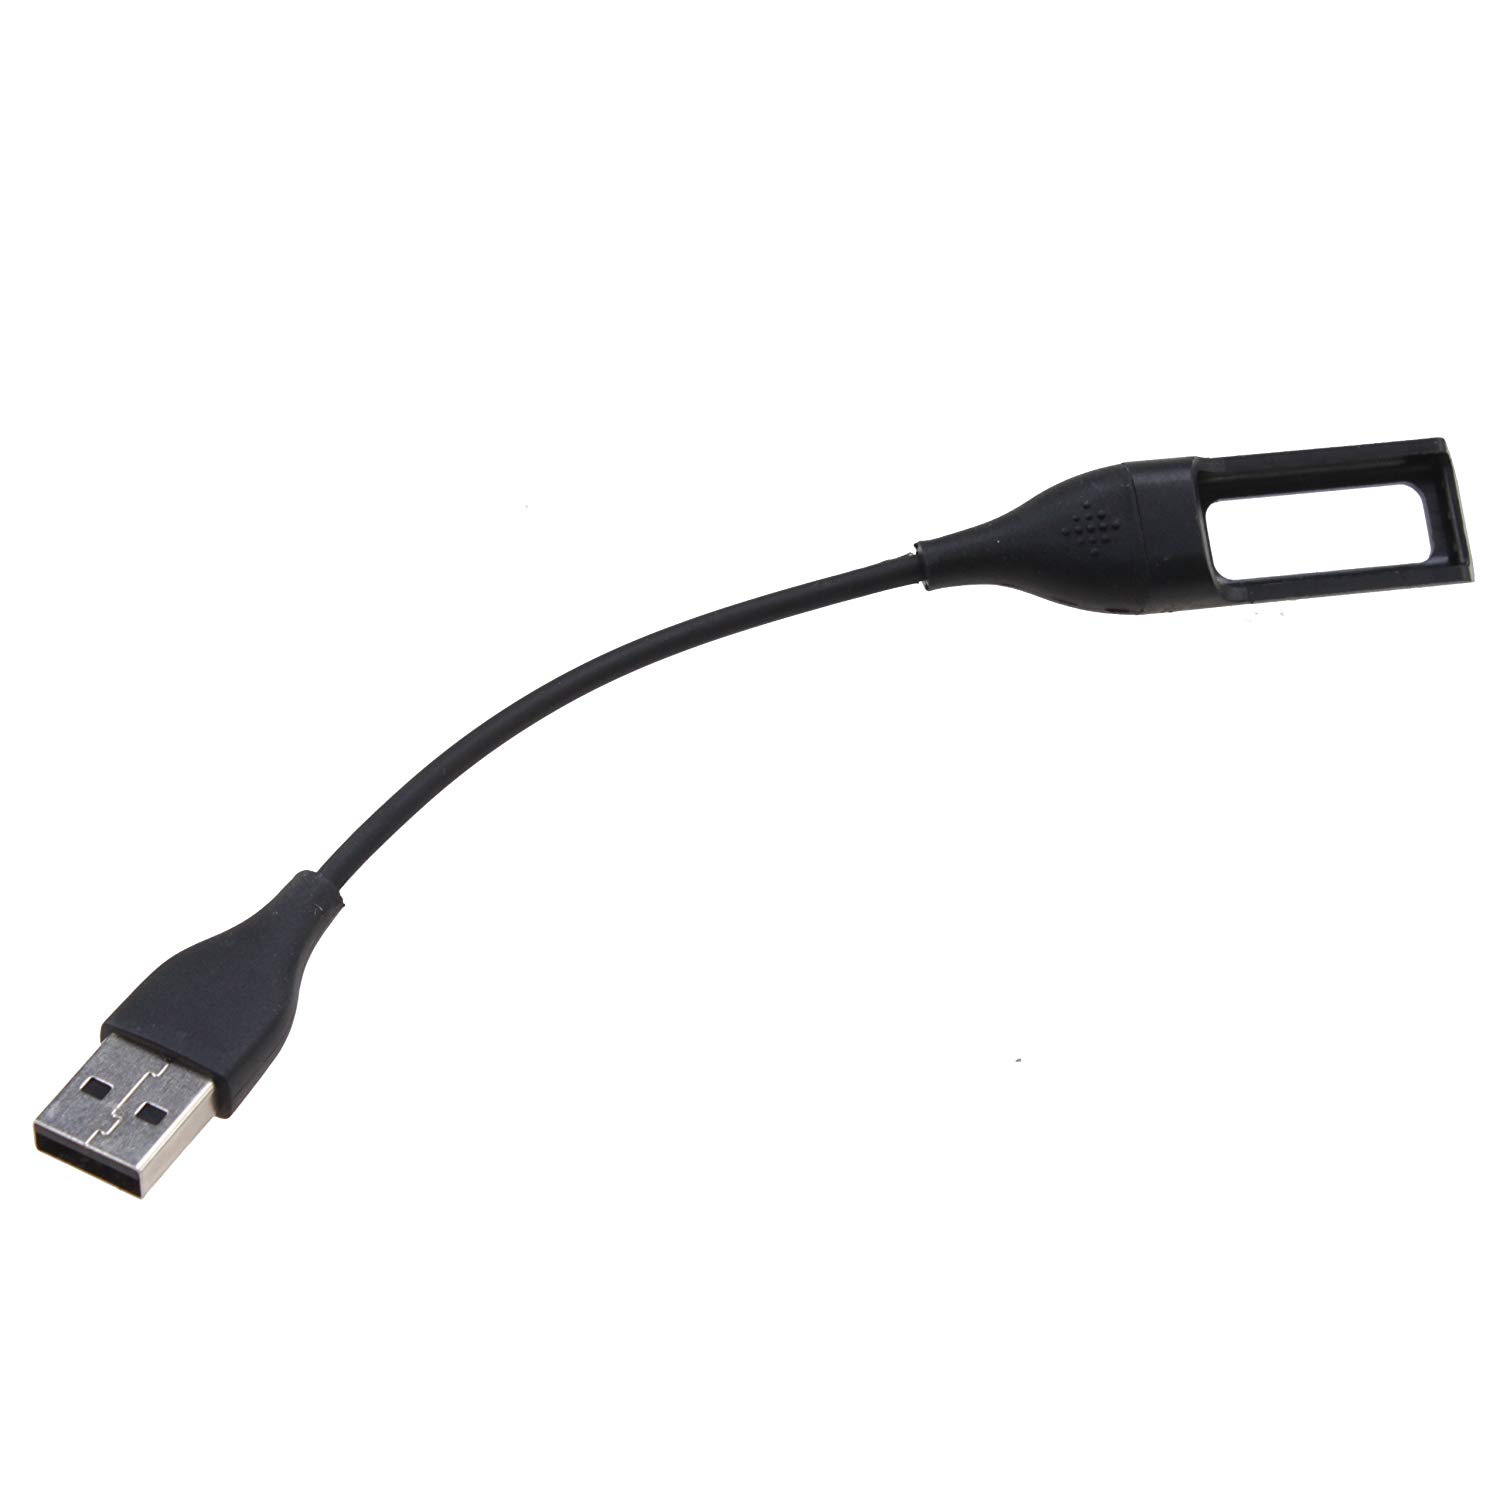 Replacement USB Charging Charger Cable Cord for Fitbit Flex Wireless Activity Bracelet 